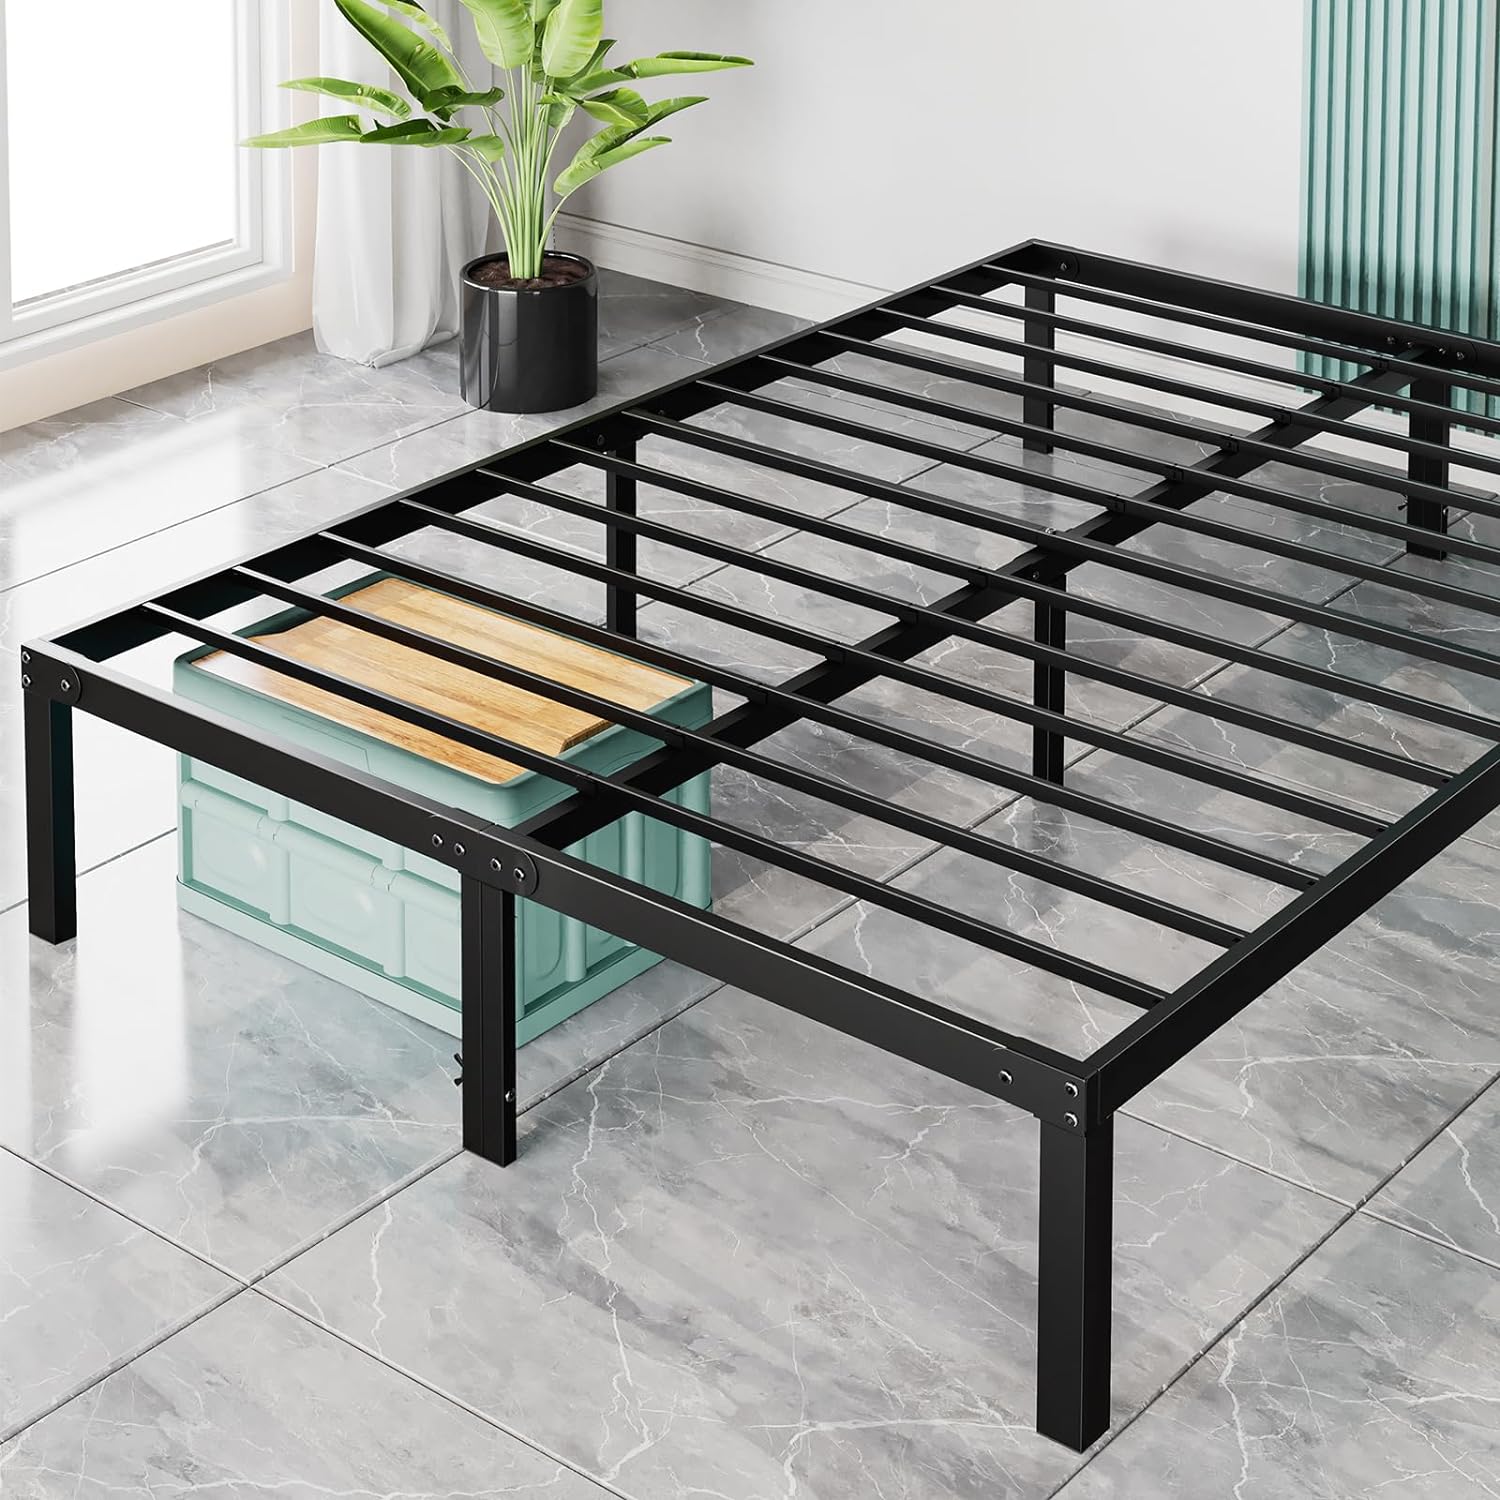 Limited Time Offer: Sweetcrispy Queen Bed Frame - Heavy Duty Metal Platform Bed Frames Queen Size with Storage Space - Up to 23% Off!